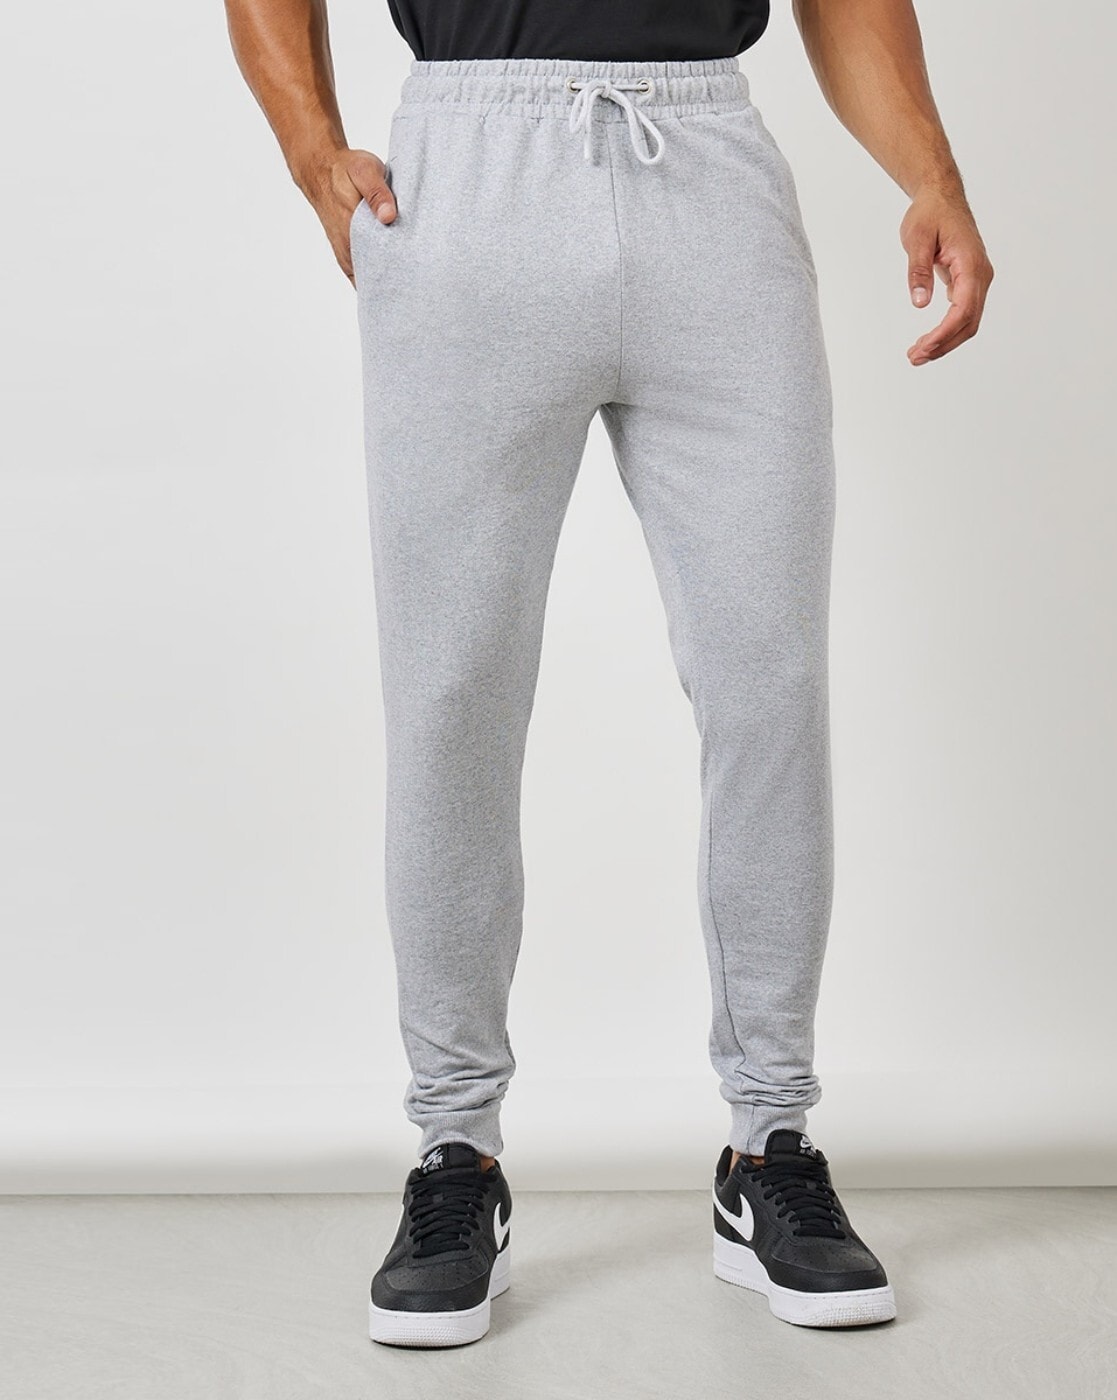 Don't sweat it: how to pick a good-quality pair of track pants | Australian  fashion | The Guardian